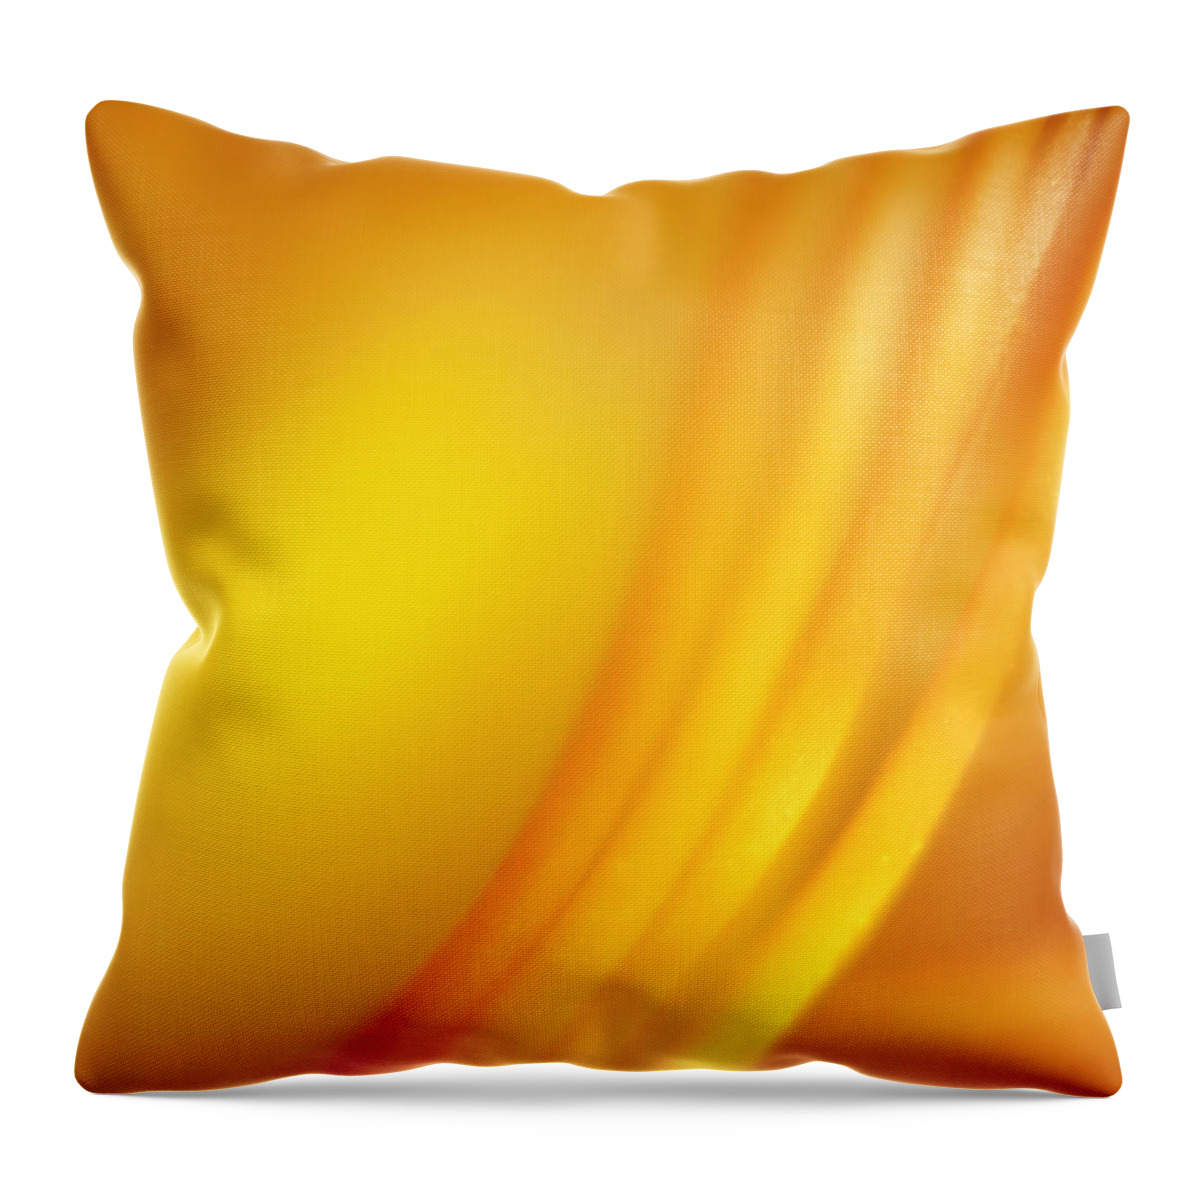 Filament Throw Pillow featuring the photograph Filament by Scott Norris